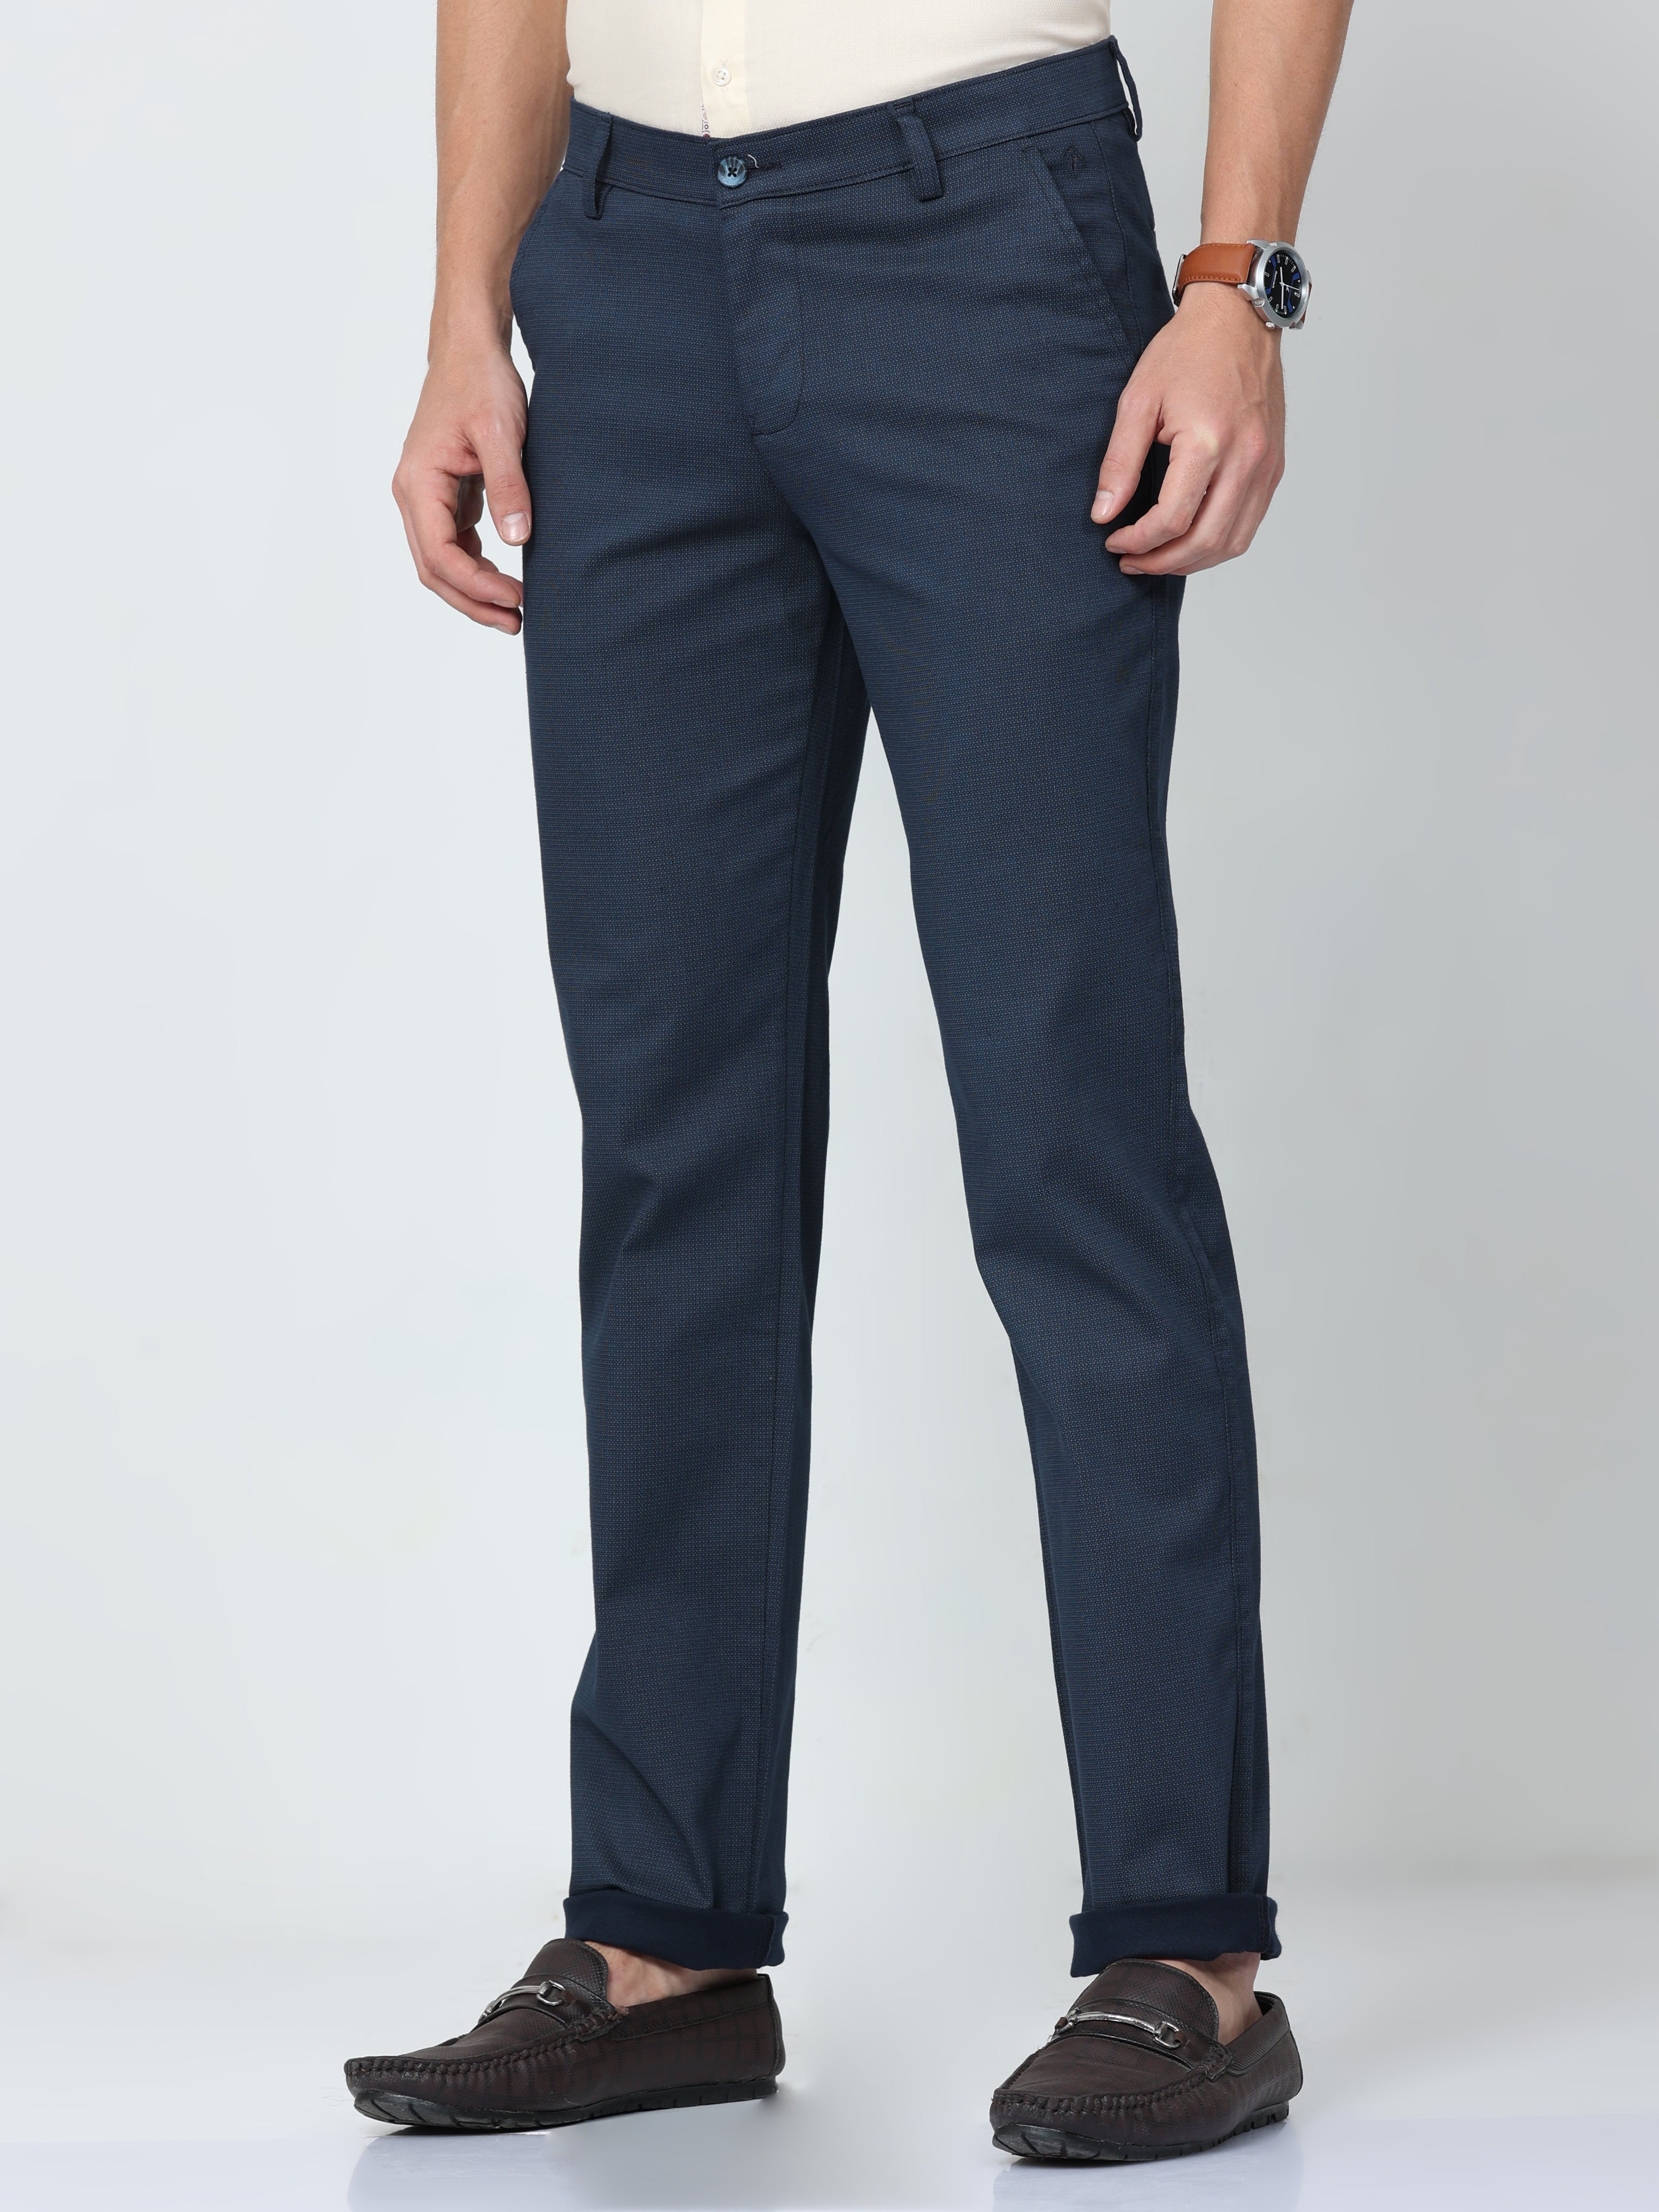 CP BRO Mens Chiesel Fit Solid Navy Color Trousers | Tbo2-13 B-Nvy-Cf-Ly